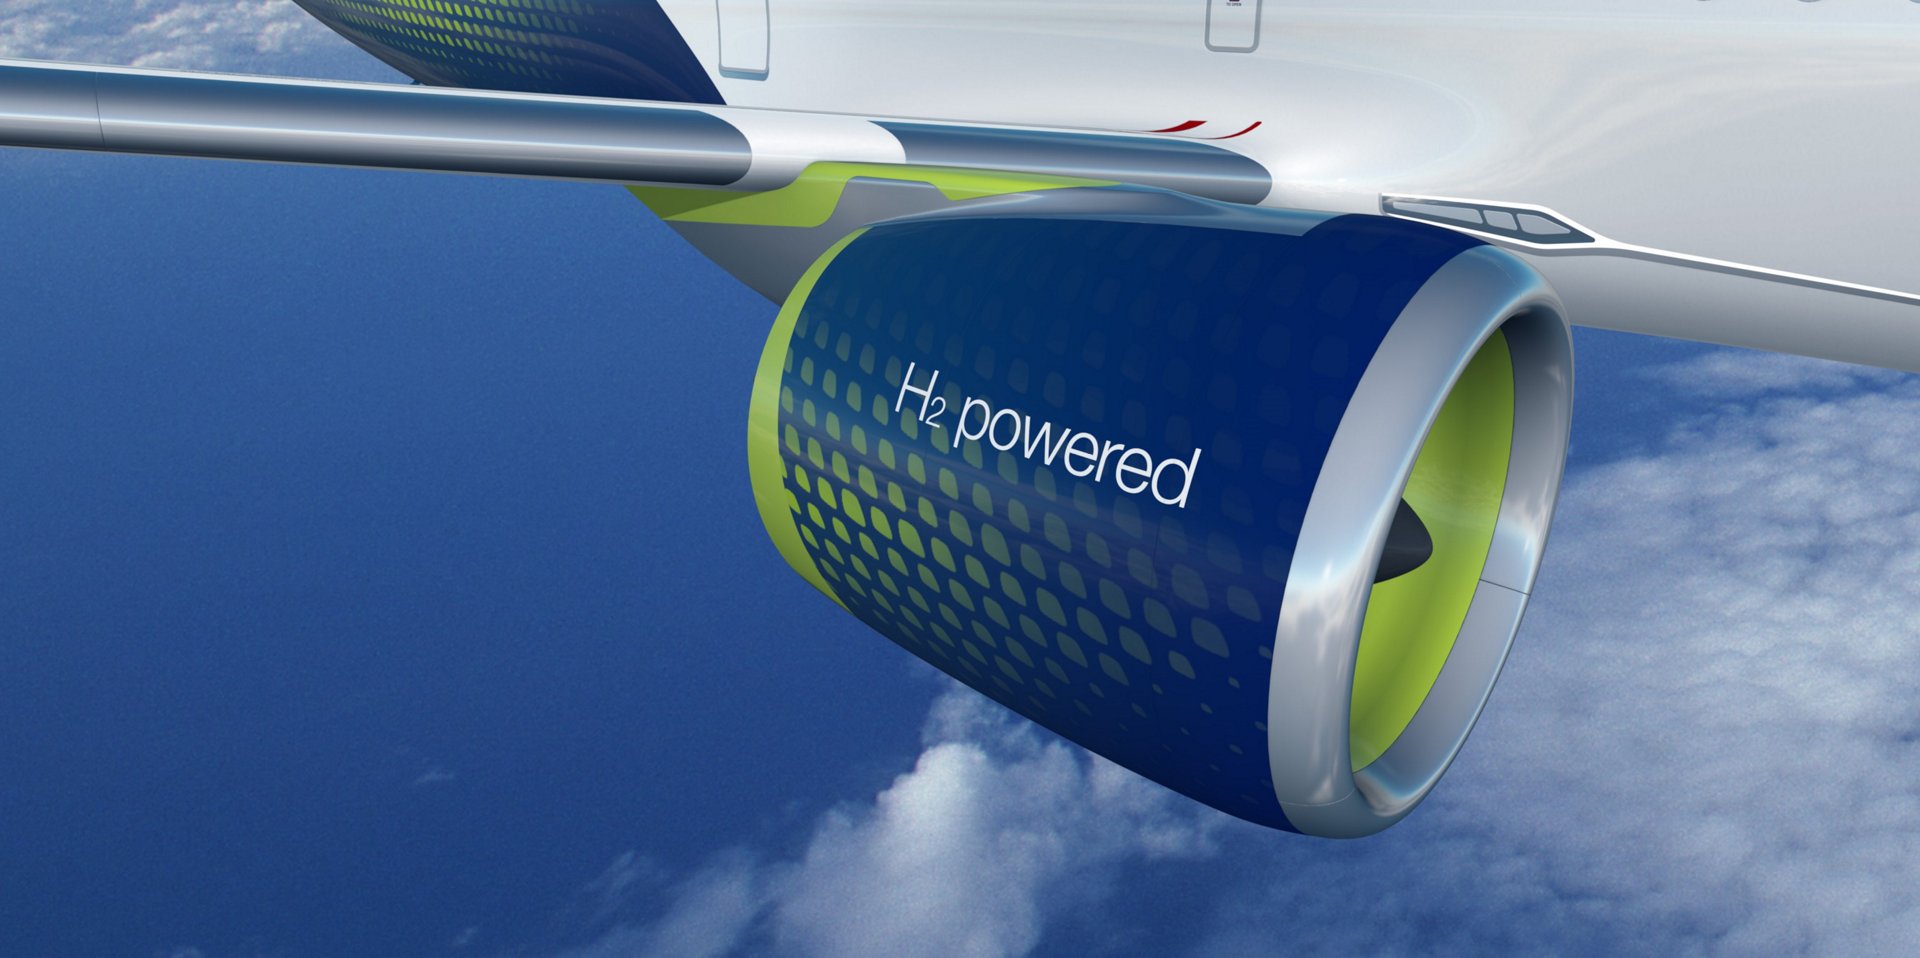 Airbus expects appearance of the airplanes on 100% sustainable air fuel to the end of the decade